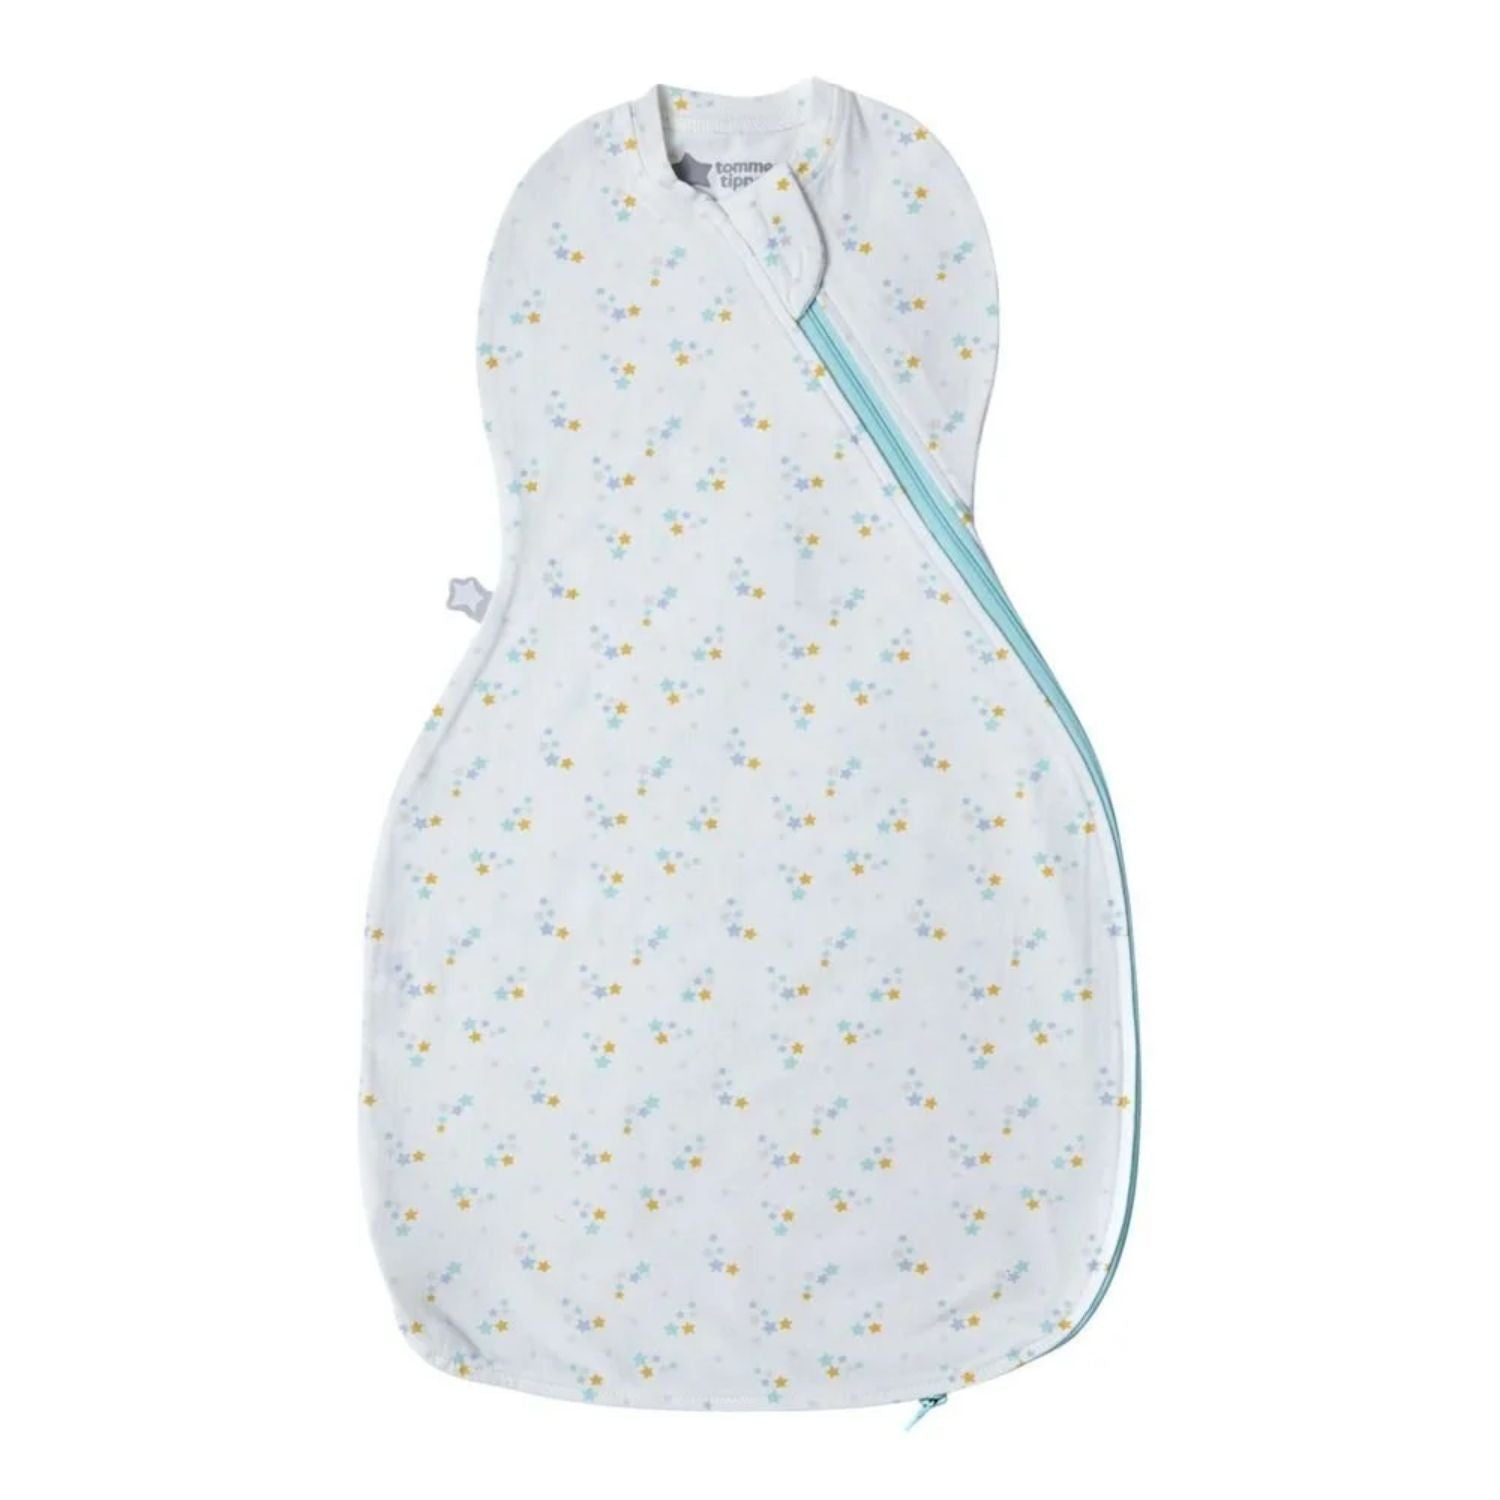 Tommee Tippee Grobag Easy Swaddle 0-3 Months